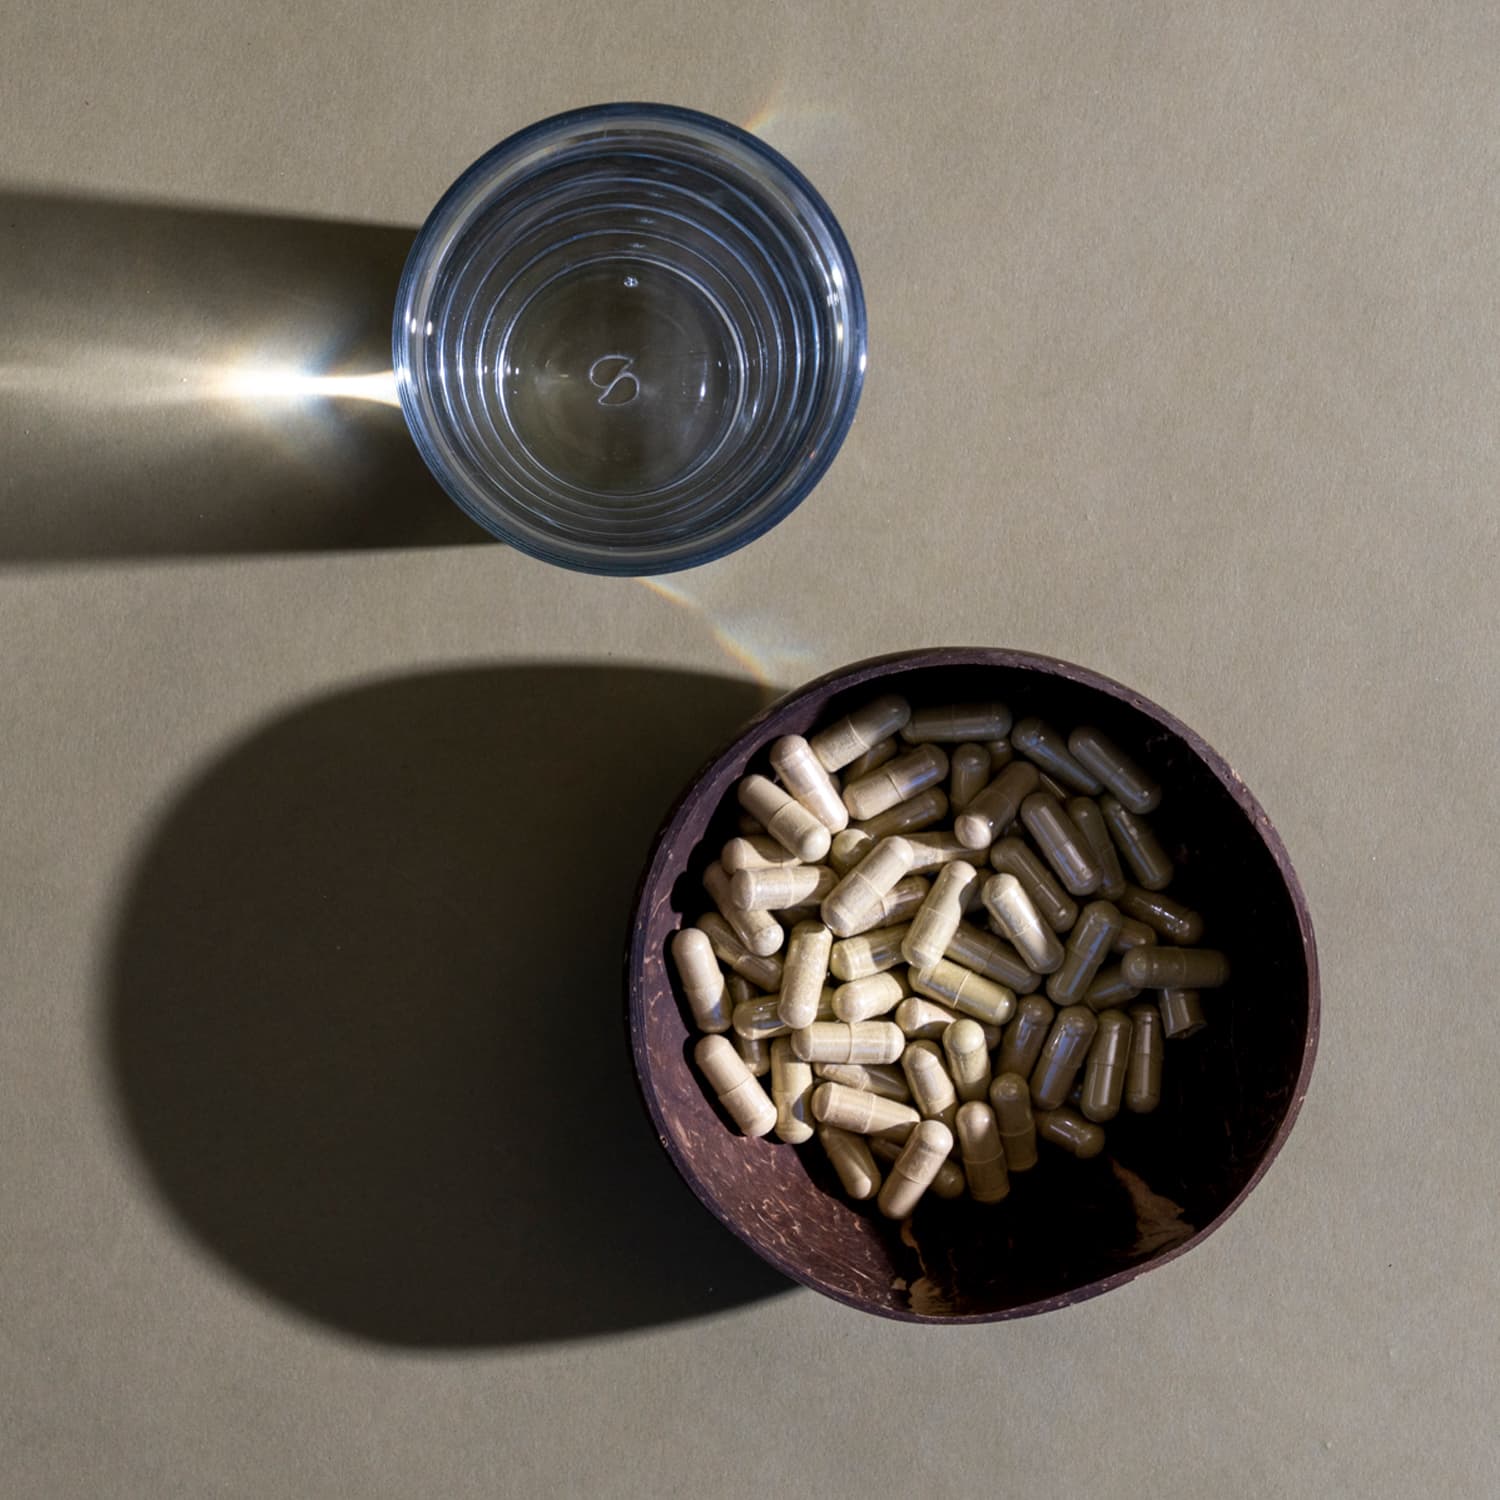 White Vein Kratom Capsules in a bowl near a glass of water